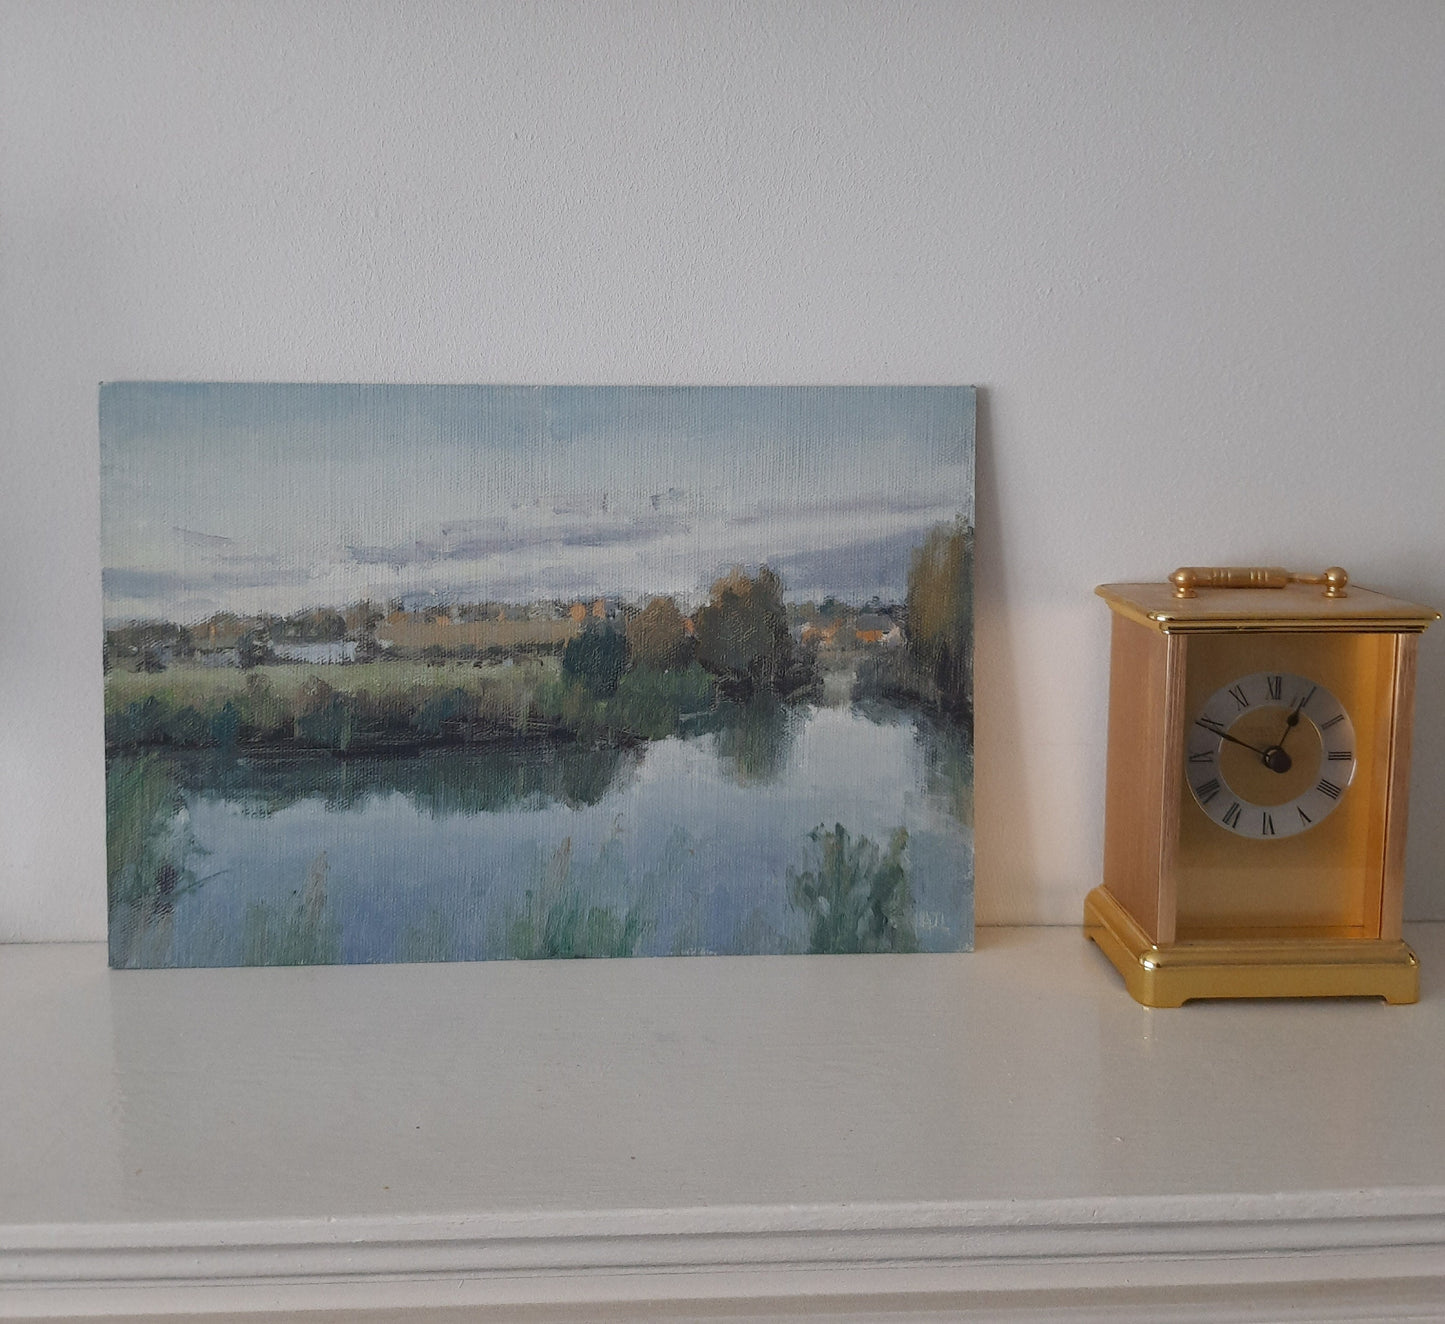 The unframed painting sat on the mantelpiece